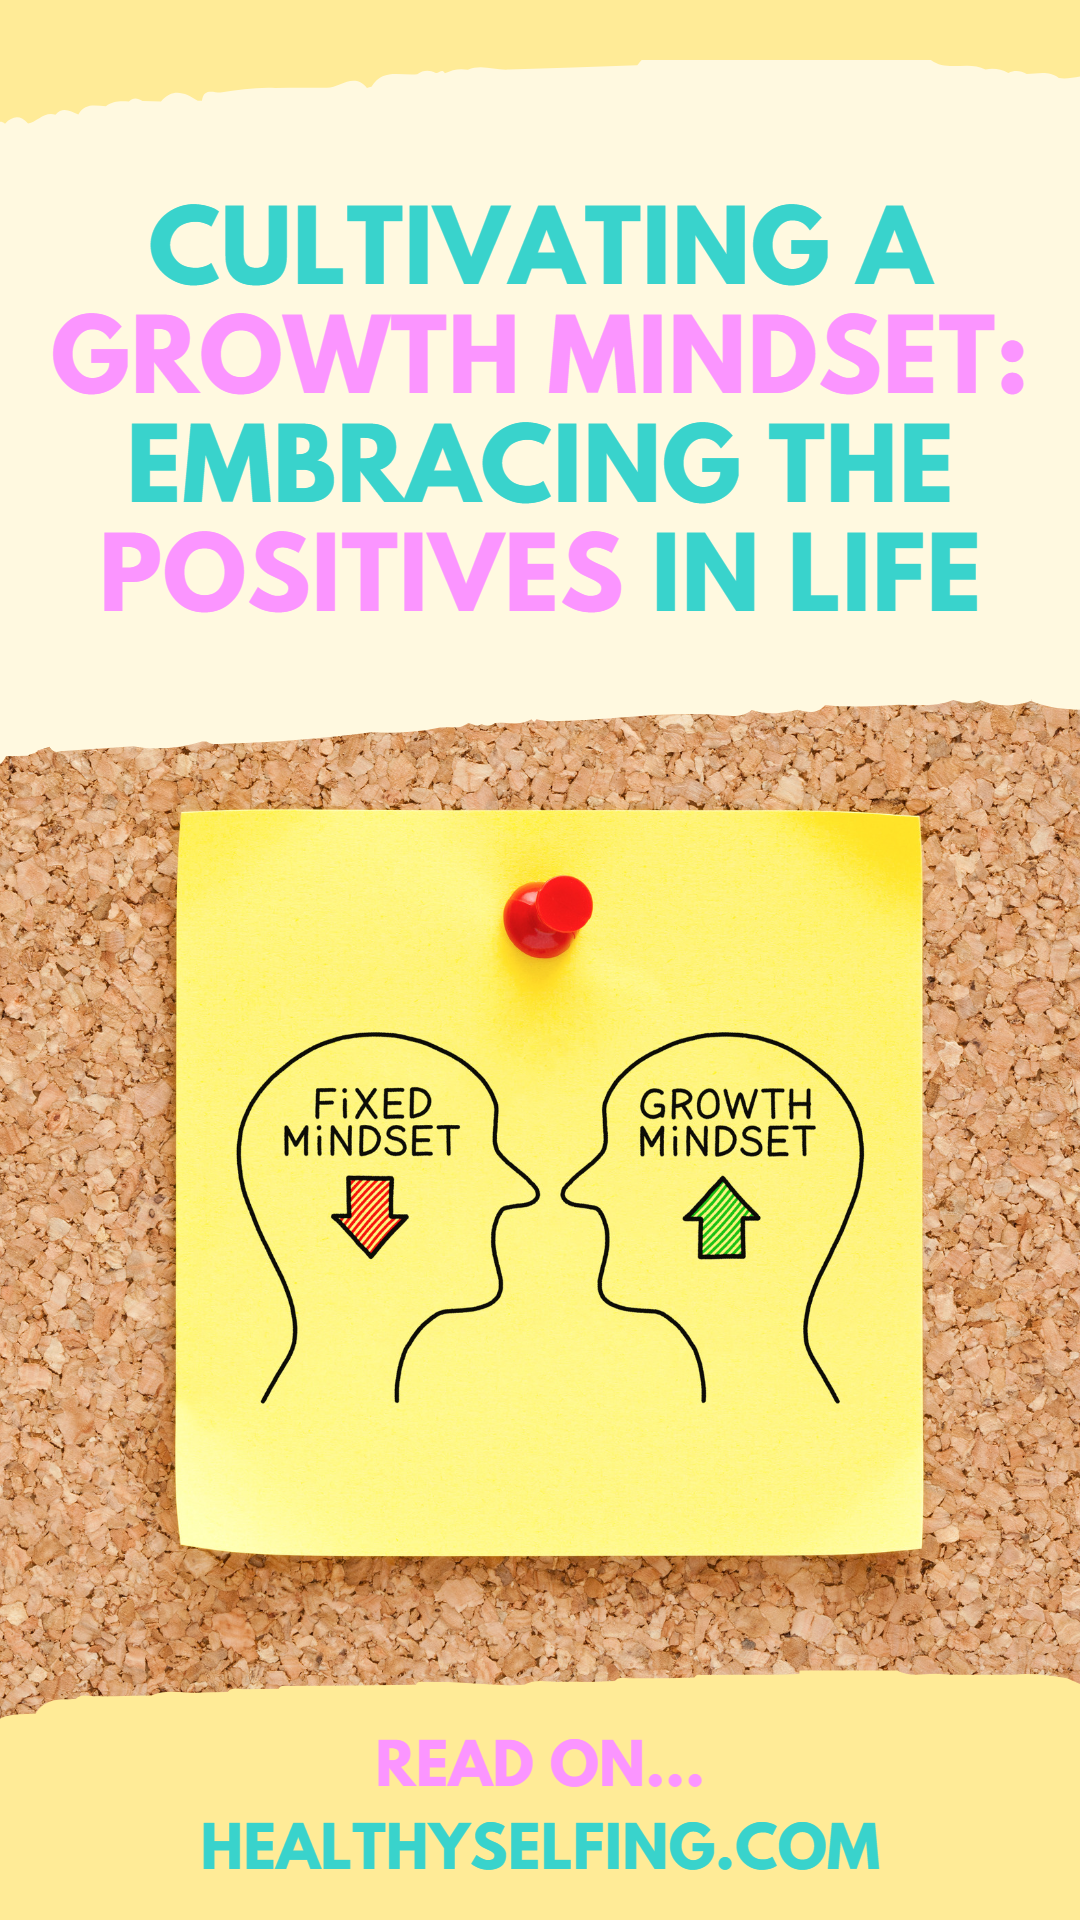 Cultivating a Growth Mindset: Embracing the Positives in Life